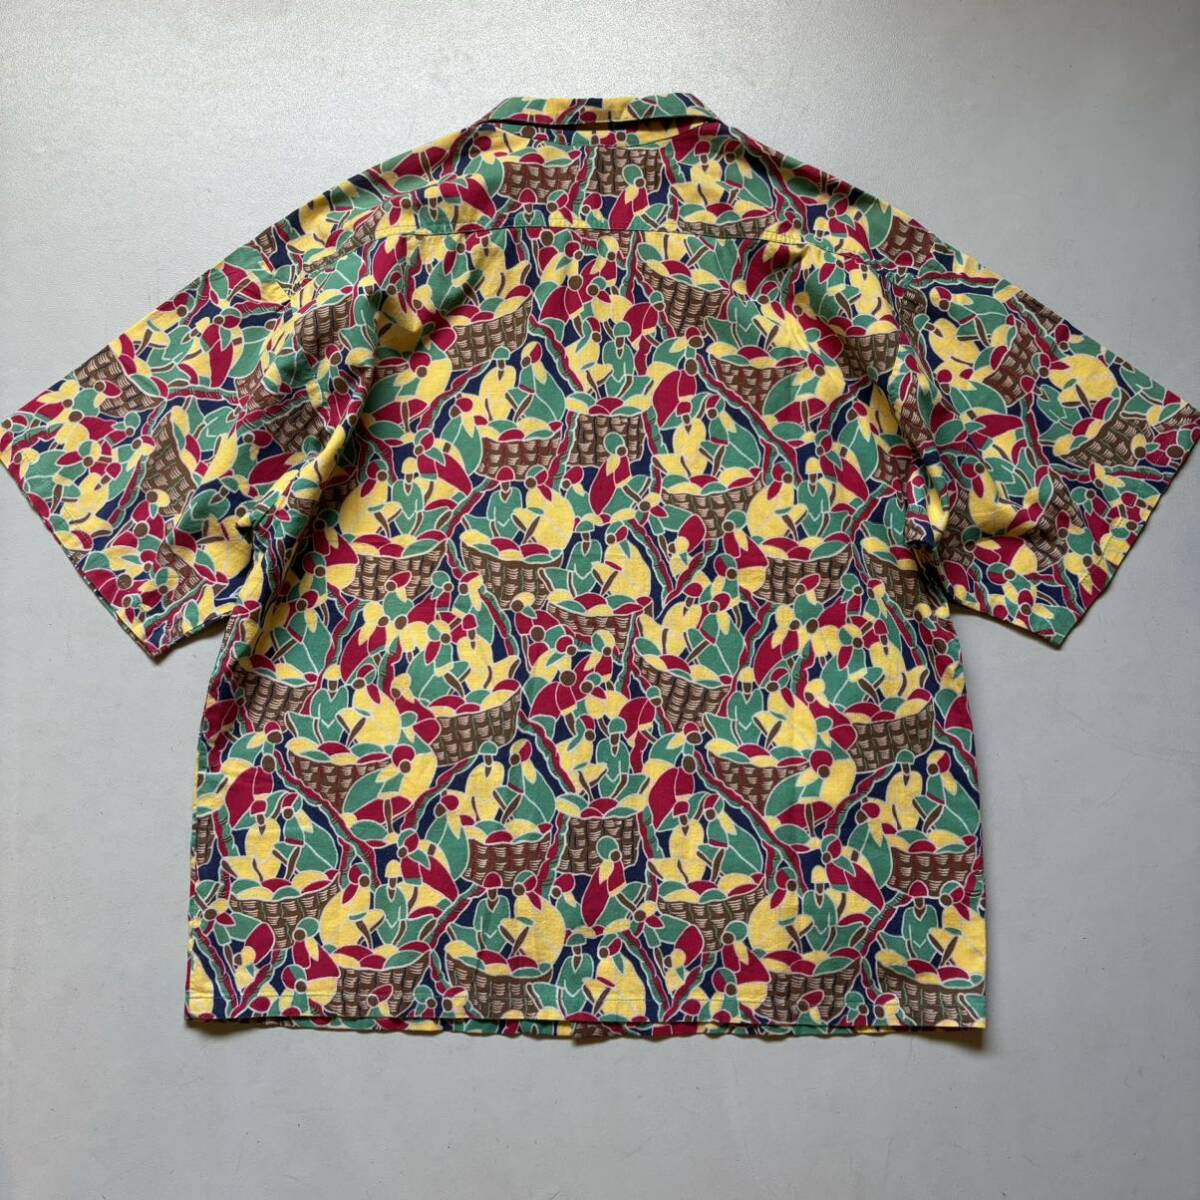 KINO All-over pattern S/S shirt “size L” “made in France” 総柄シャツ 半袖シャツ フランス製